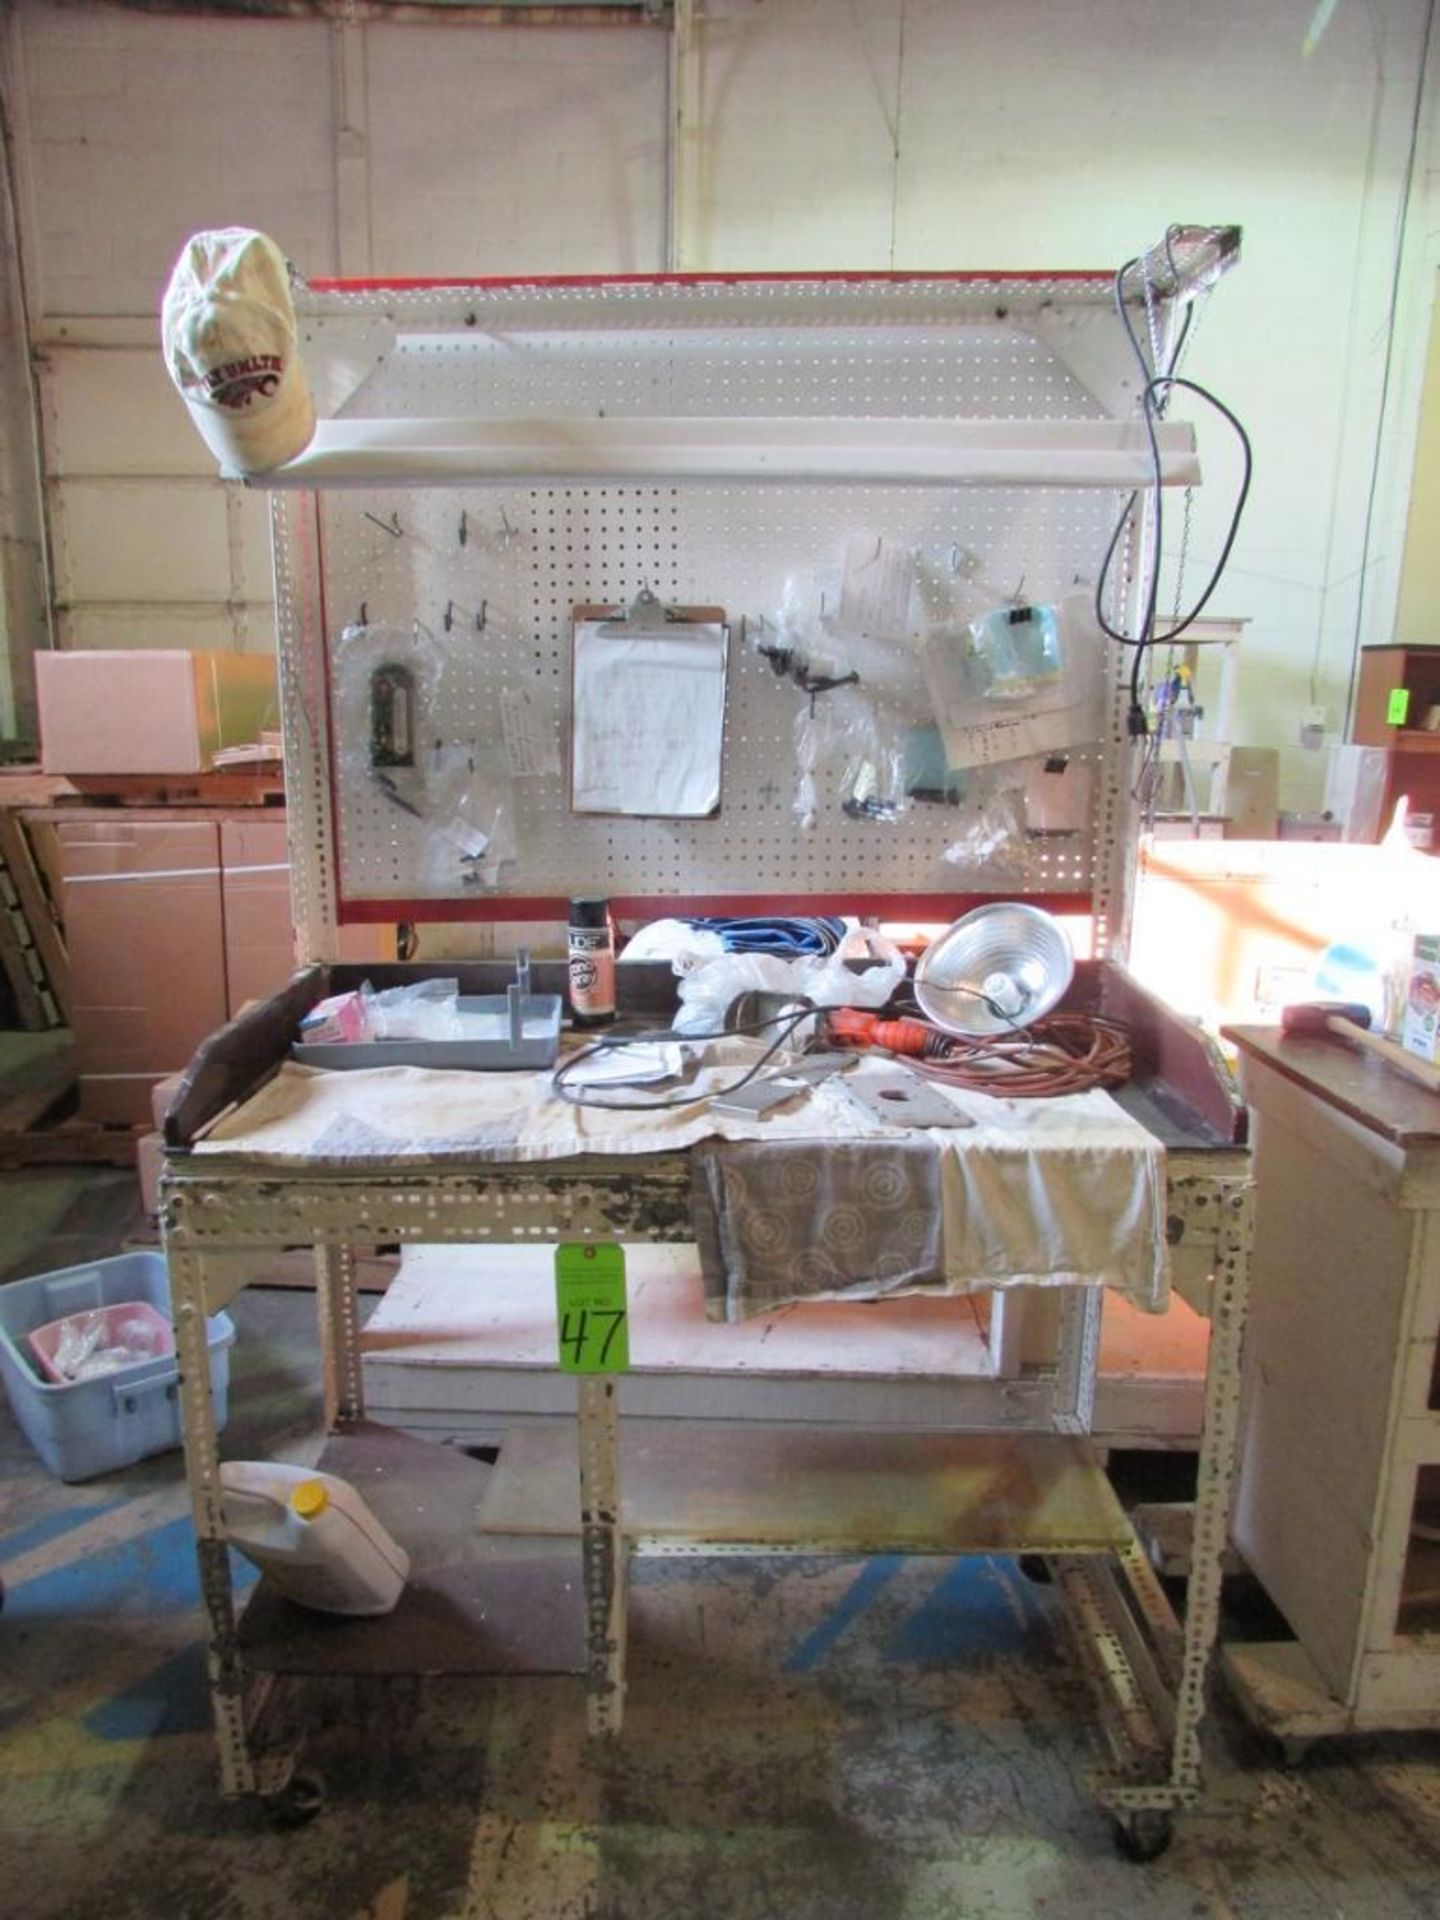 48"x24" Rolling Workbench with Overhead Lights - Image 3 of 5